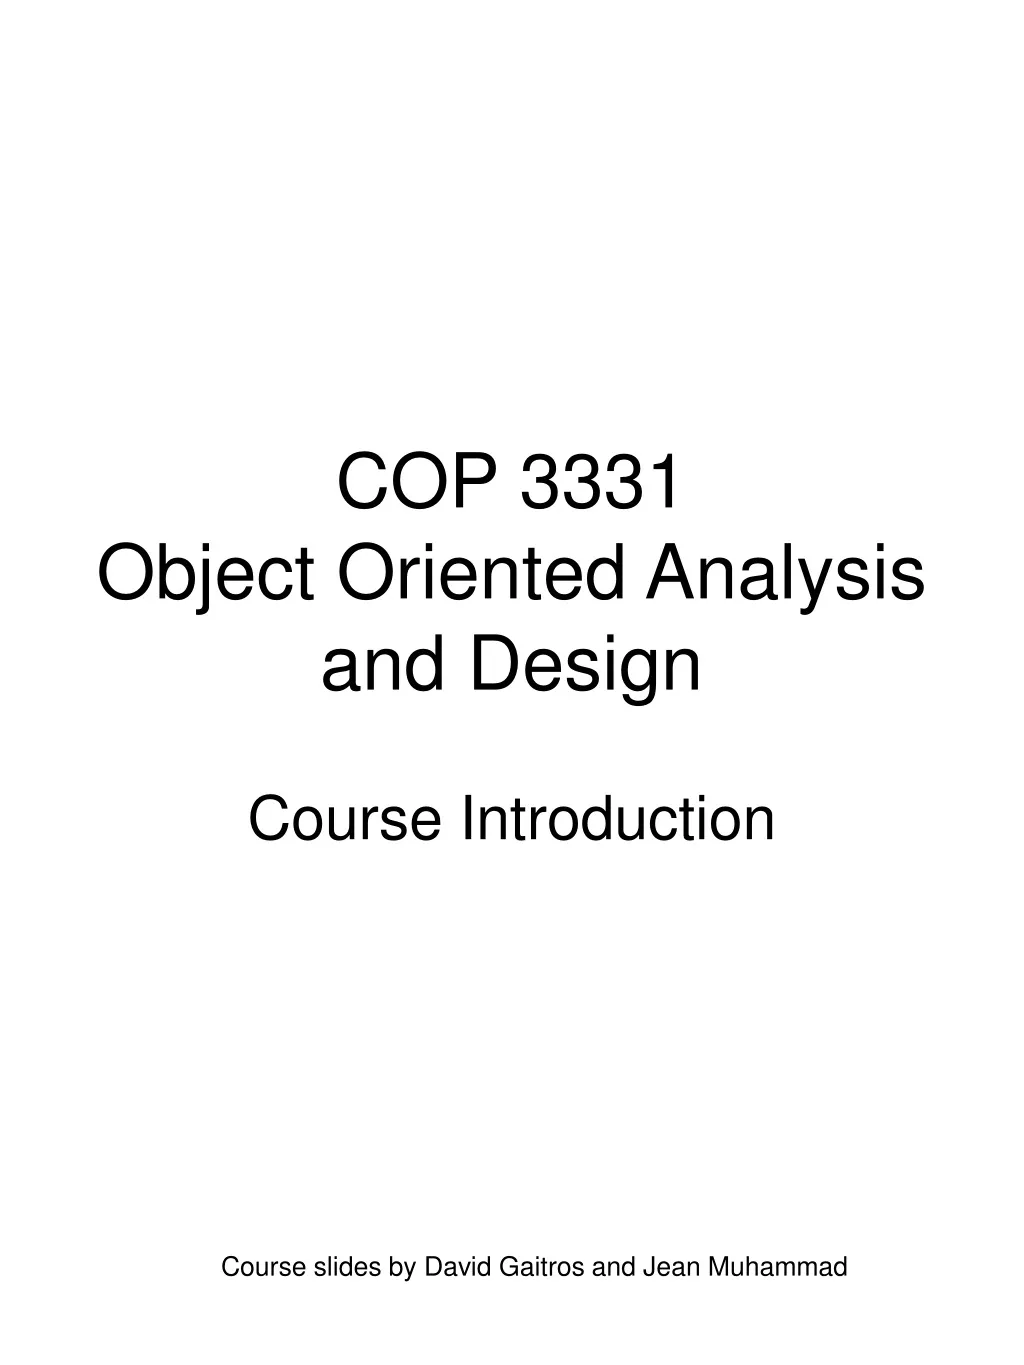 cop 3331 object oriented analysis and design